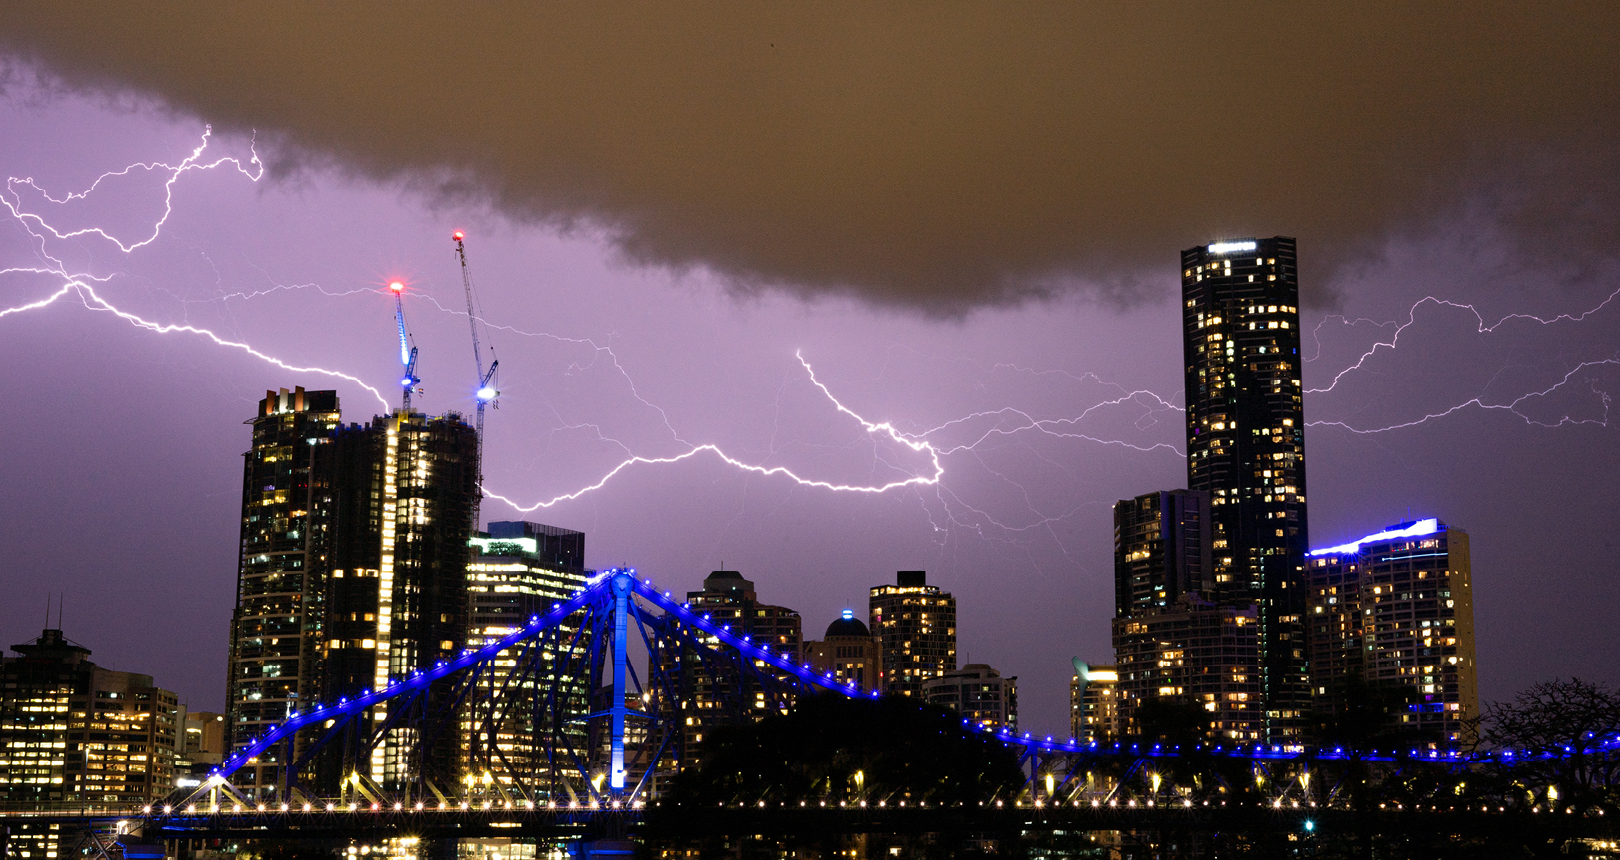 Brisbane city during a storm at night